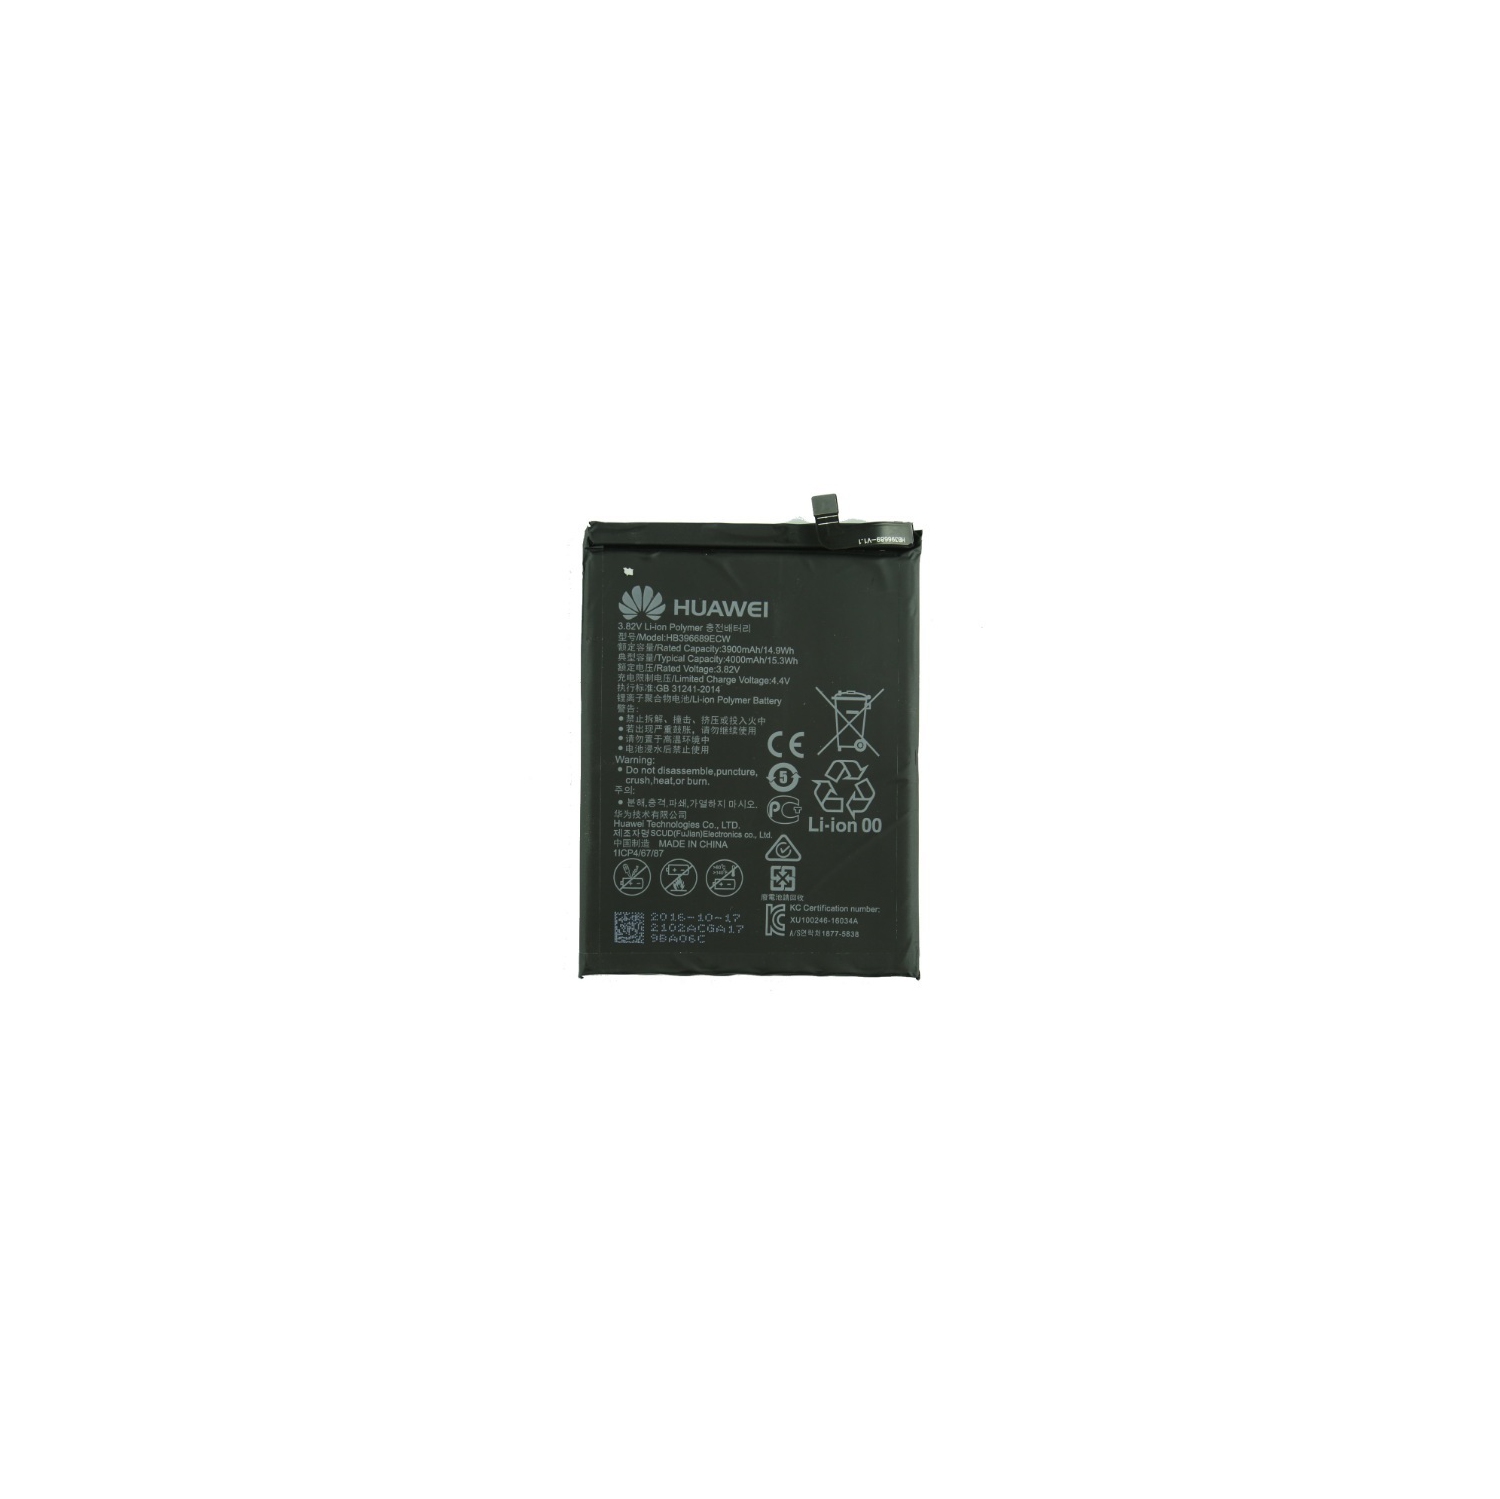 Replacement Battery for Huawei Ascend Mate 9 / Mate 9 Pro, HB396689ECW